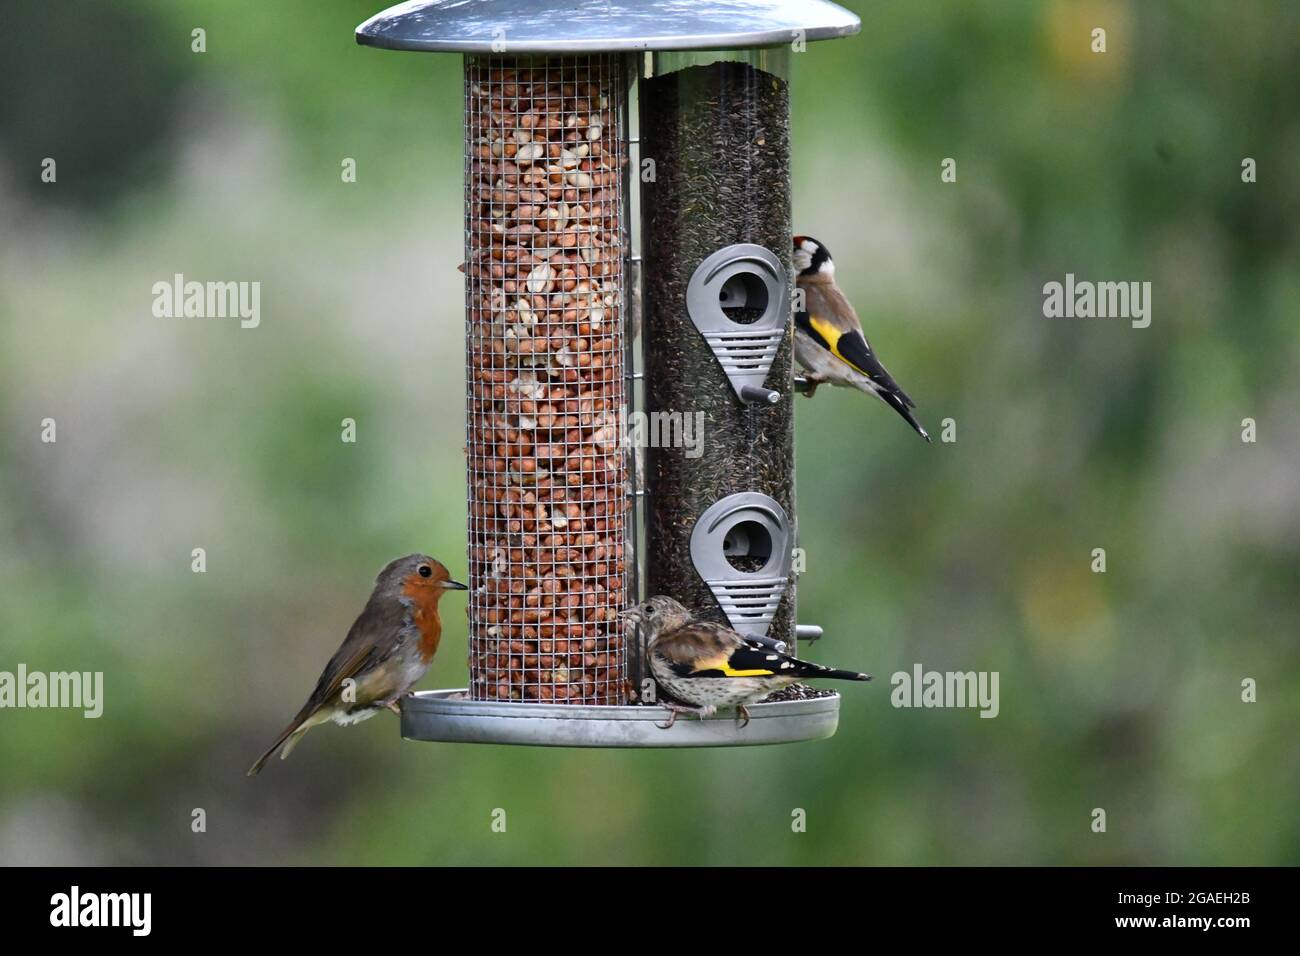 An adult and juvenile Goldfinch and A Robin Redbreast feeding from a hanging bird feeder Stock Photo